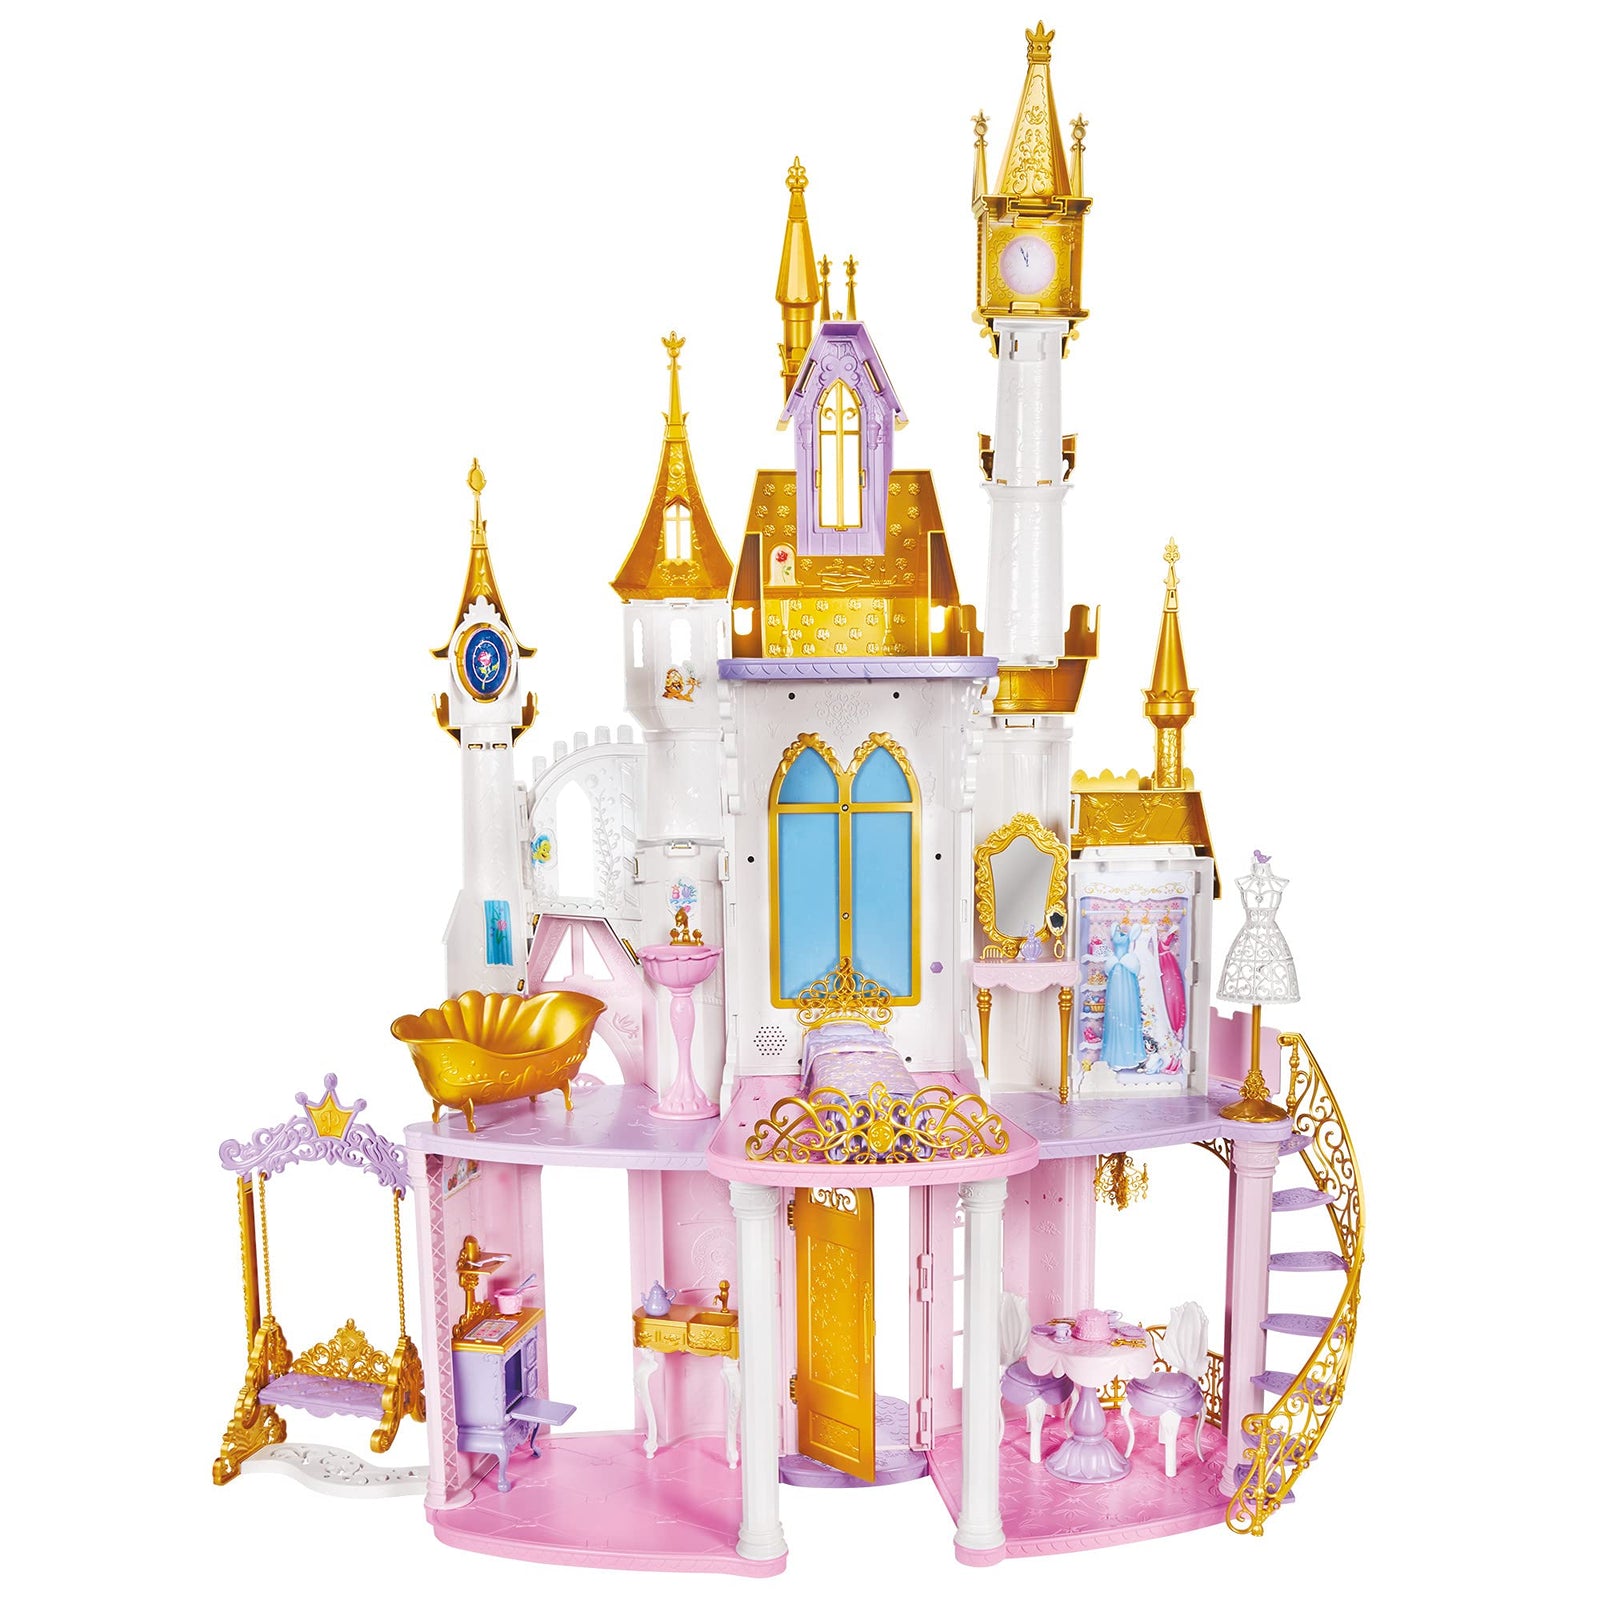 Disney Princess Ultimate Celebration Castle, 4 Feet Tall Doll House with Furniture and Accessories, Musical Fireworks Light Show, Toy for Girls 3 and Up